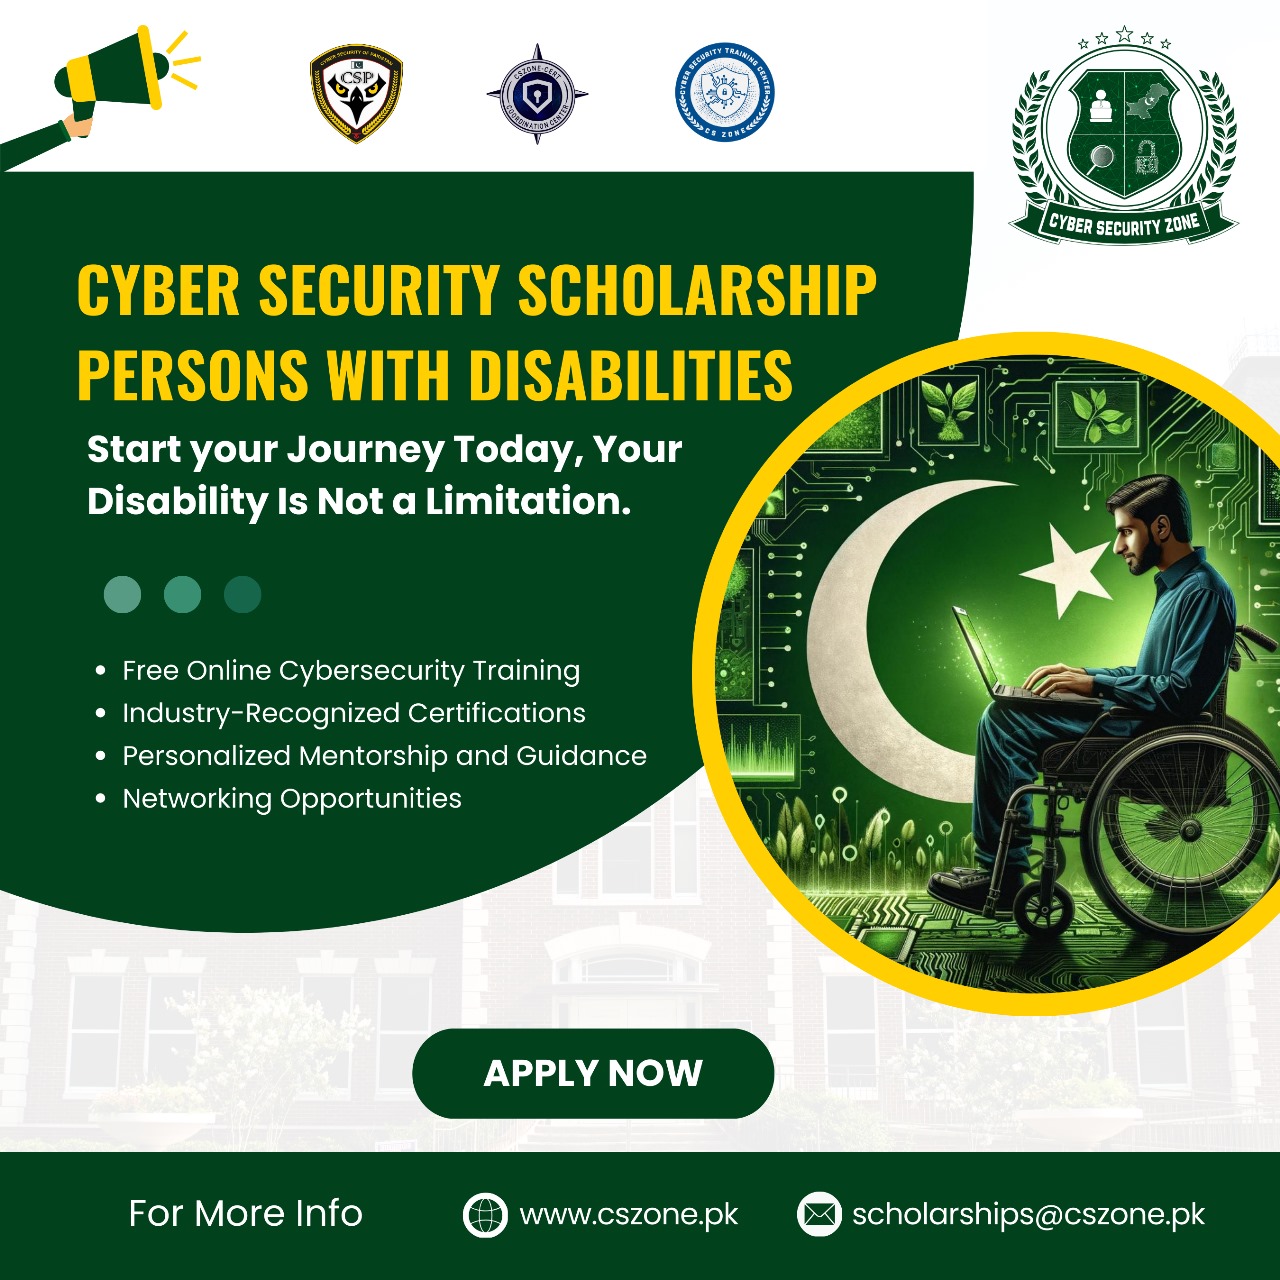 Cyber Security Scholarship for Persons with Disabilities